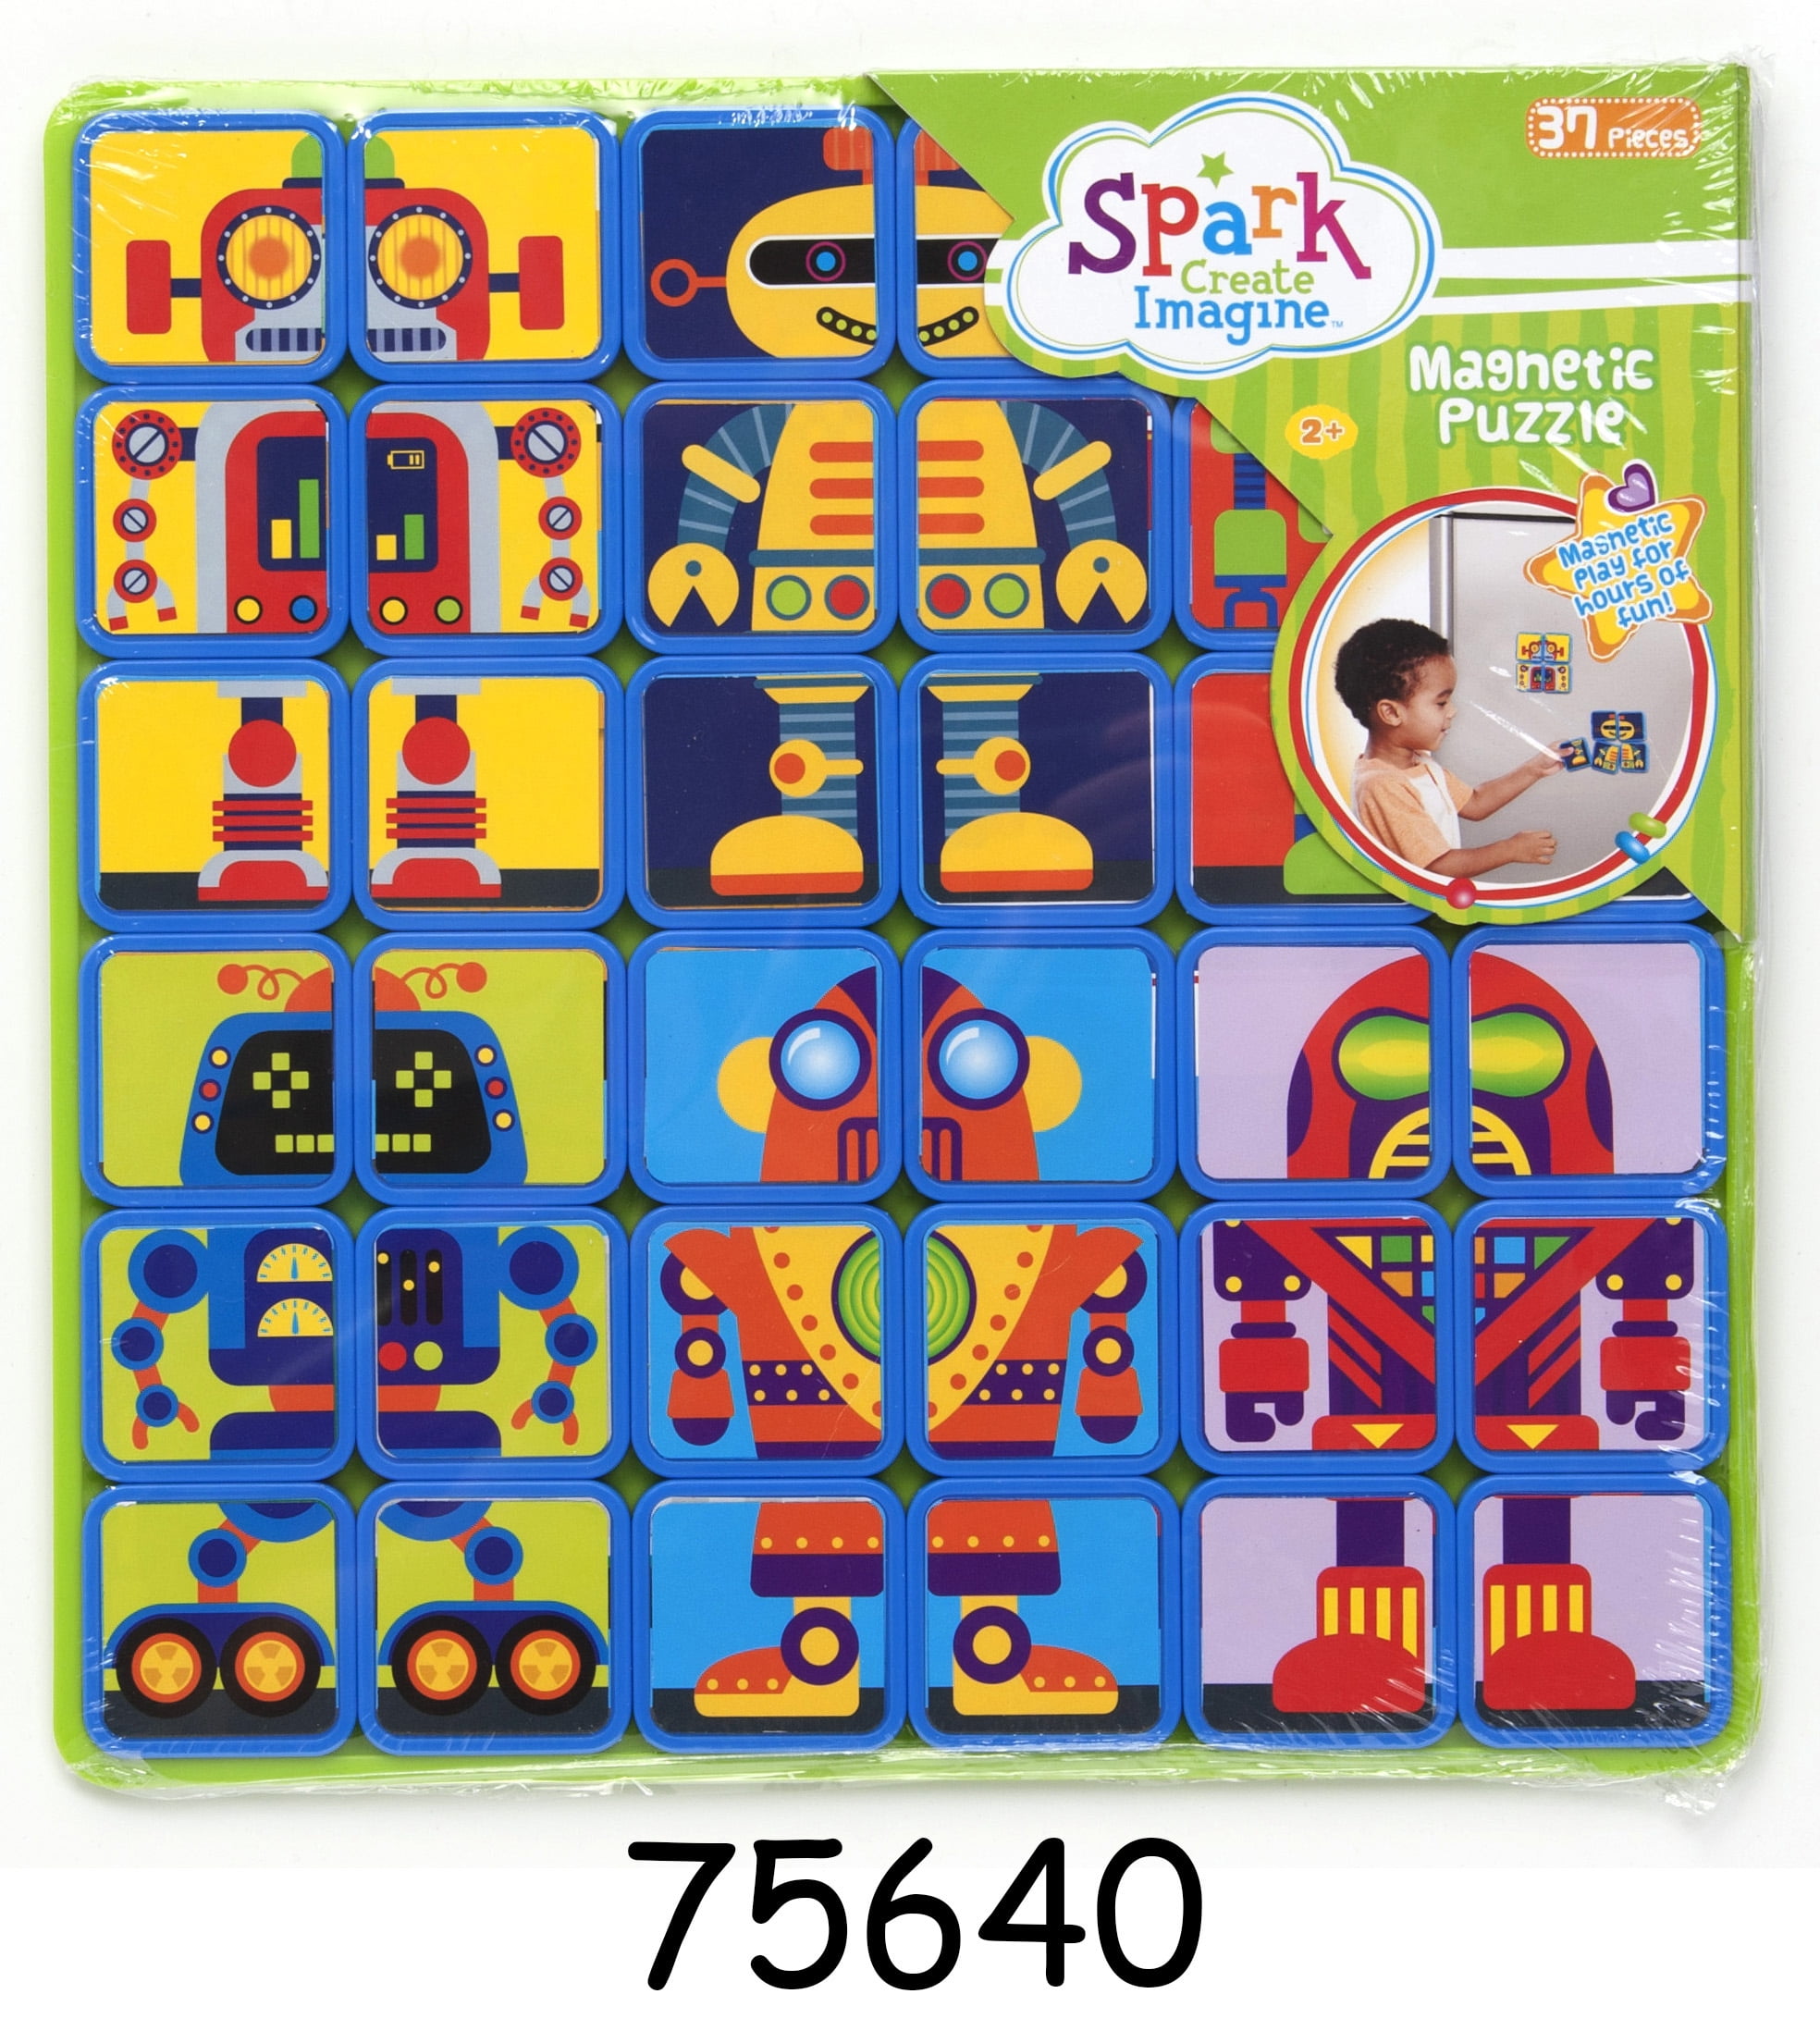 Spark Create Imagine 4 Boards Wooden Puzzle 18 Months for sale online 